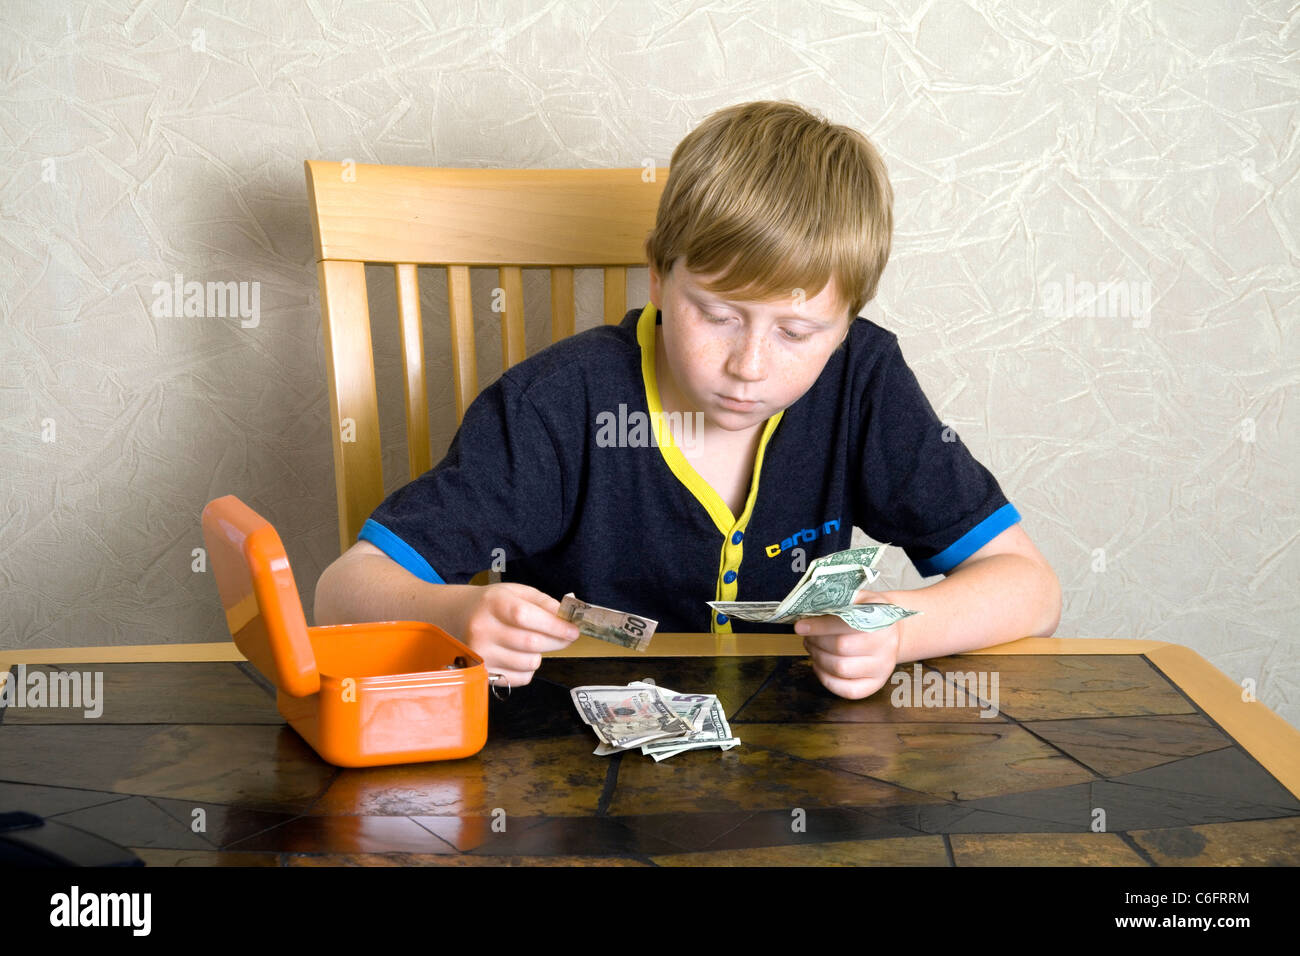 A 12 year old boy counting out American Dollars Stock Photo